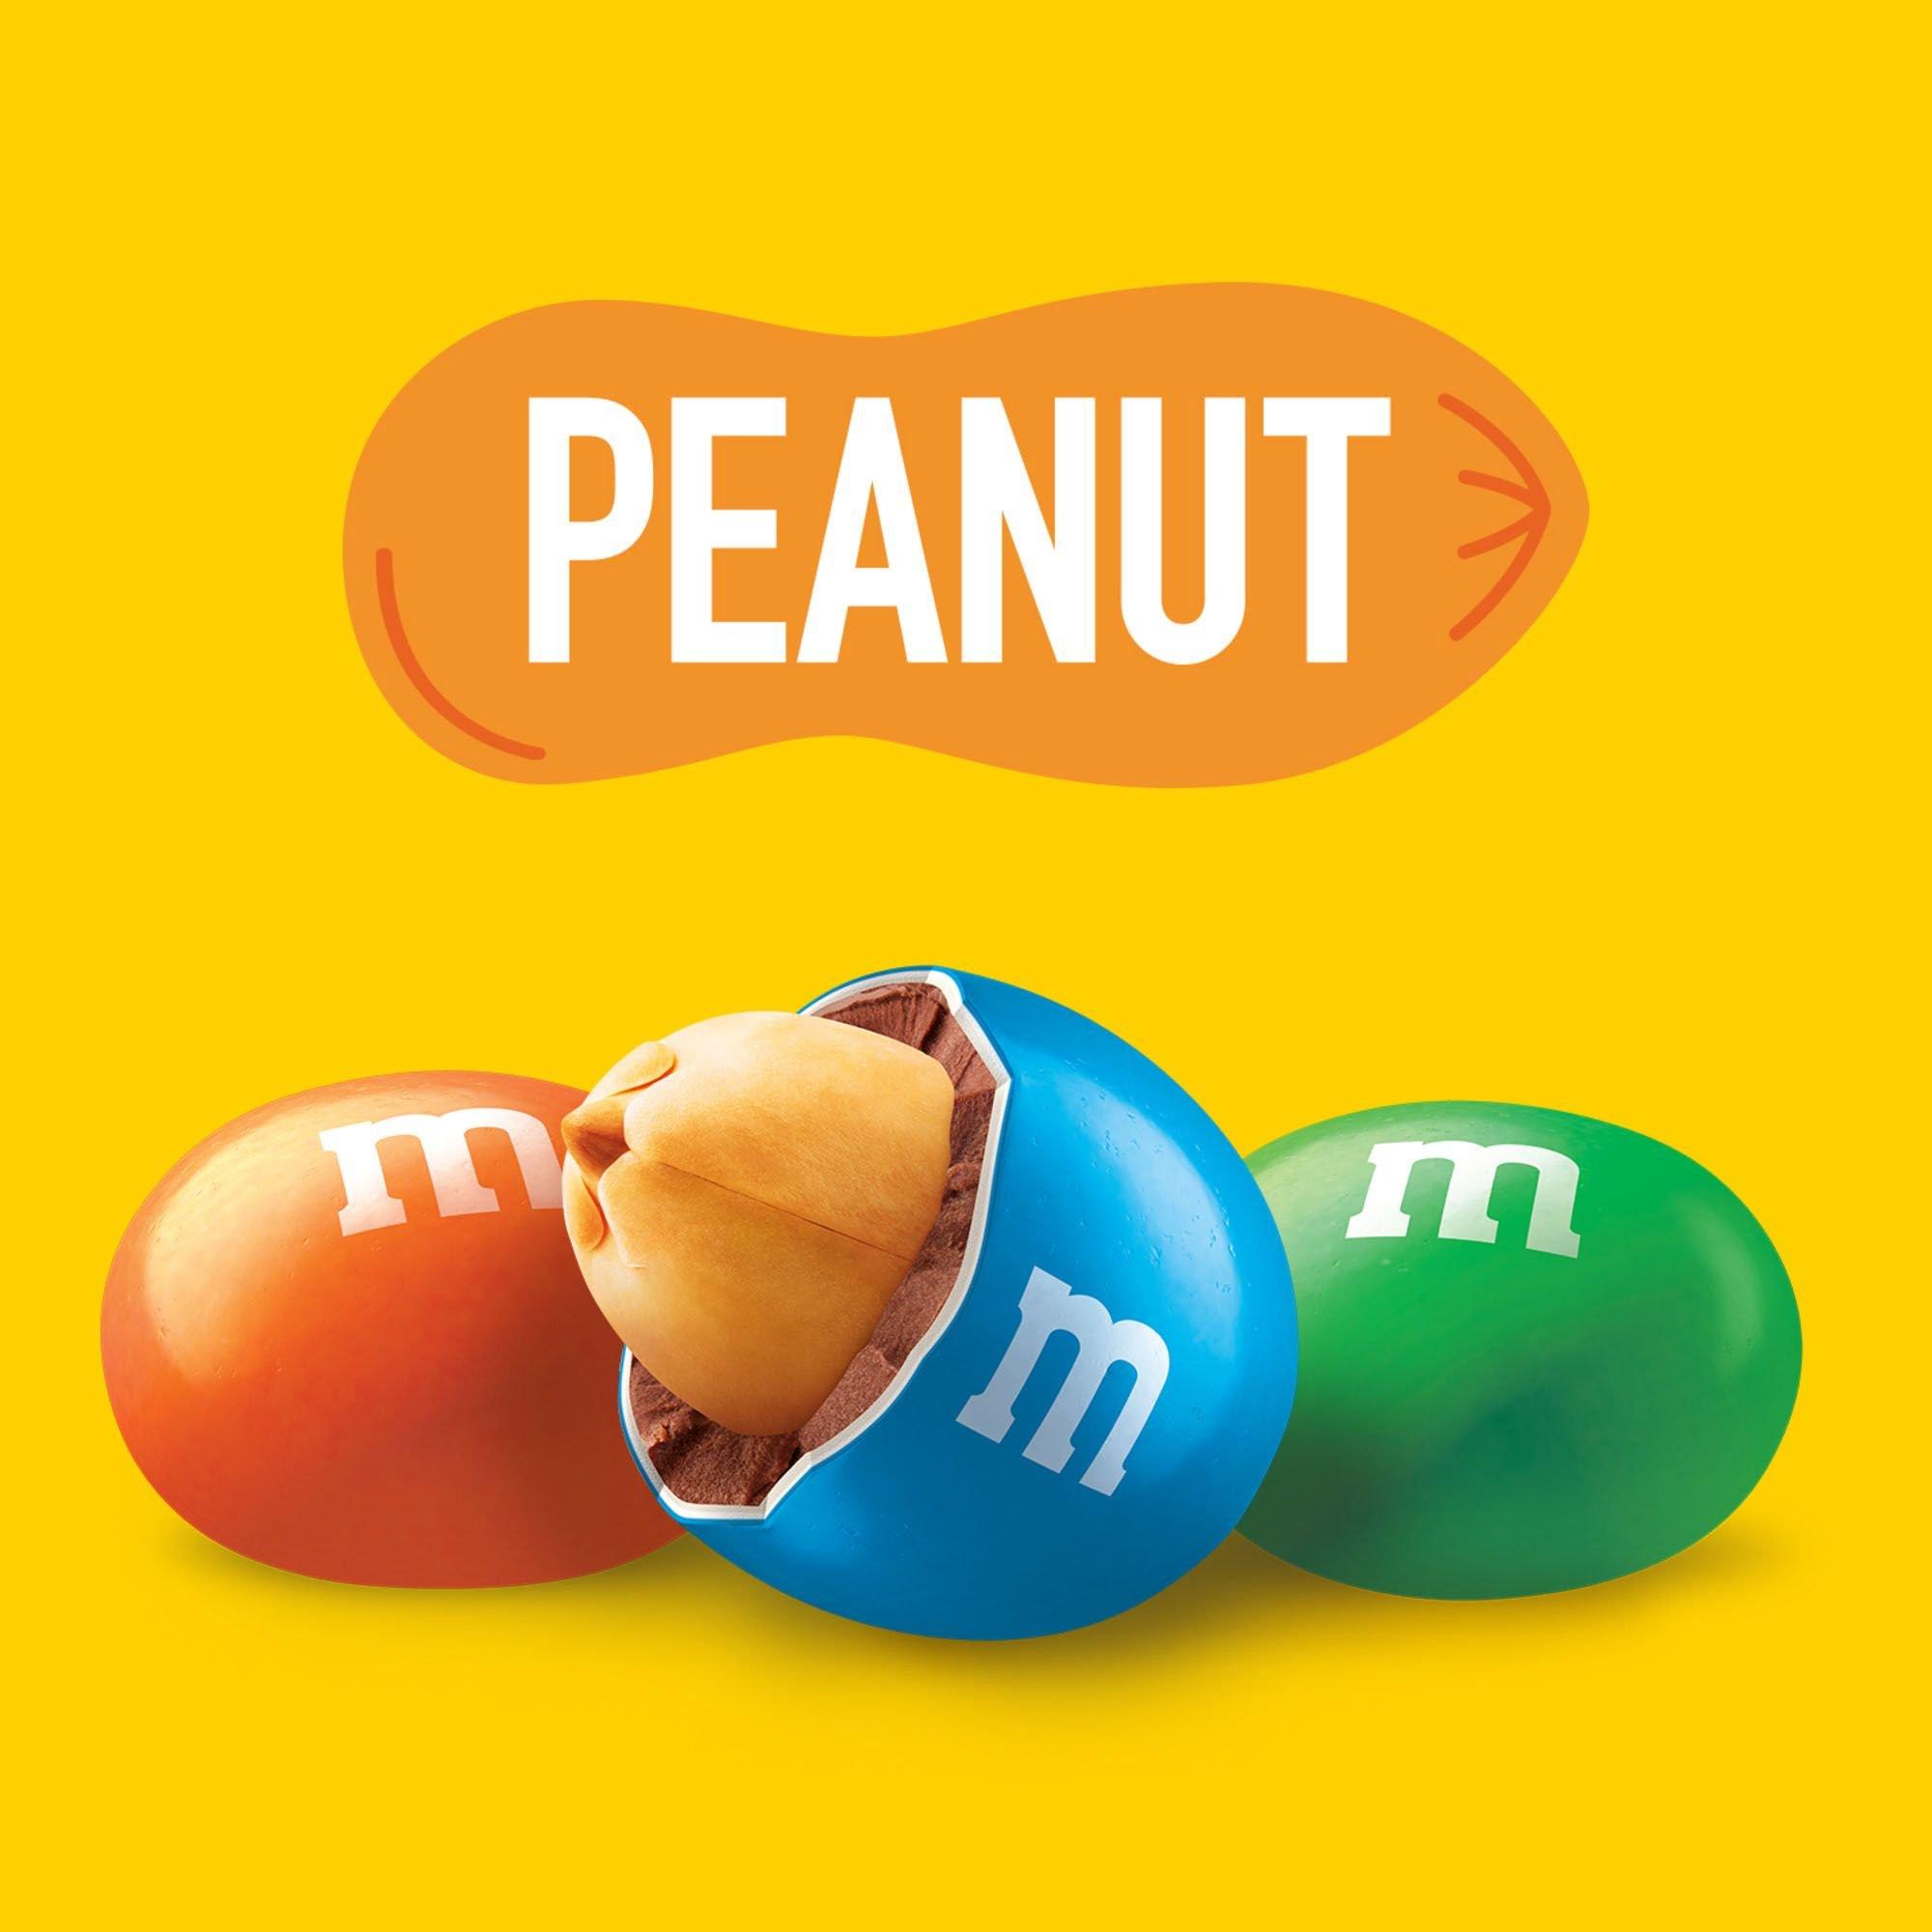 M&M'S Party Size Limited Edition Peanut Milk Chocolate Candy